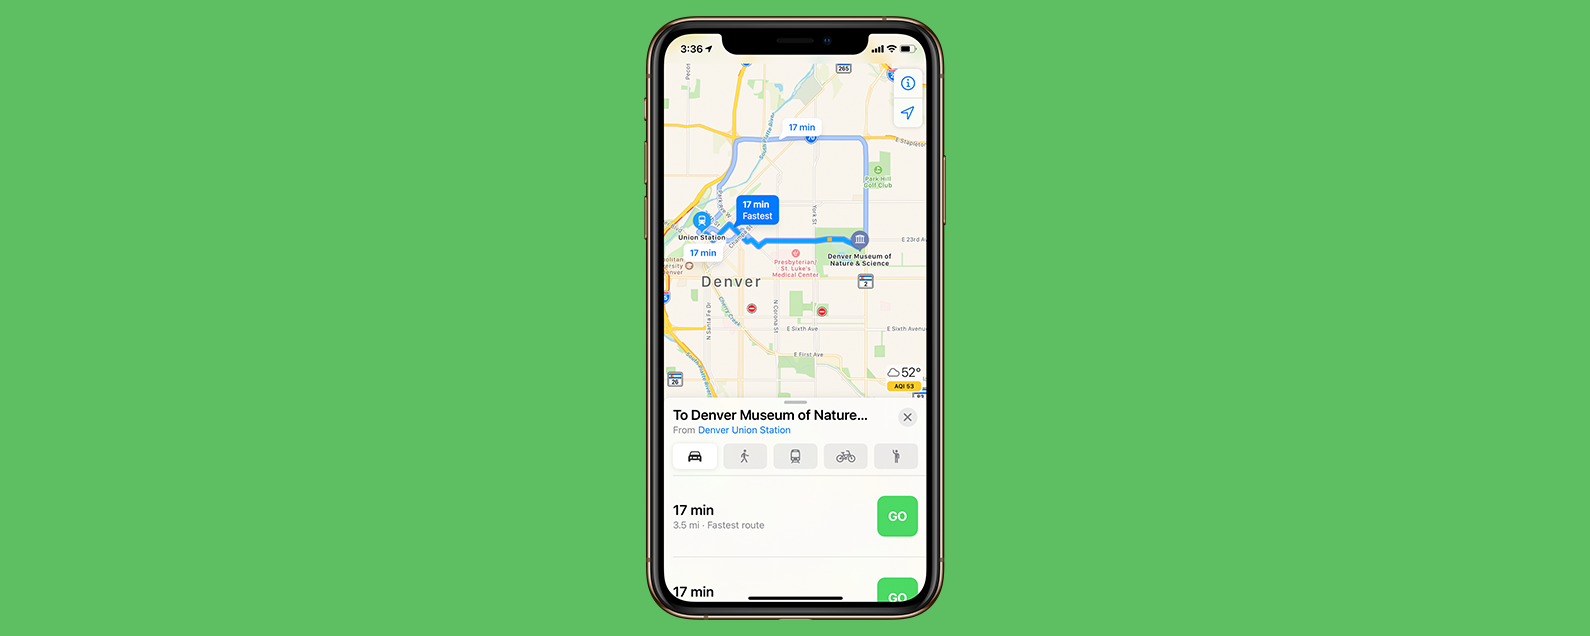 Apple Maps Transit Directions Now Available in Las Vegas and